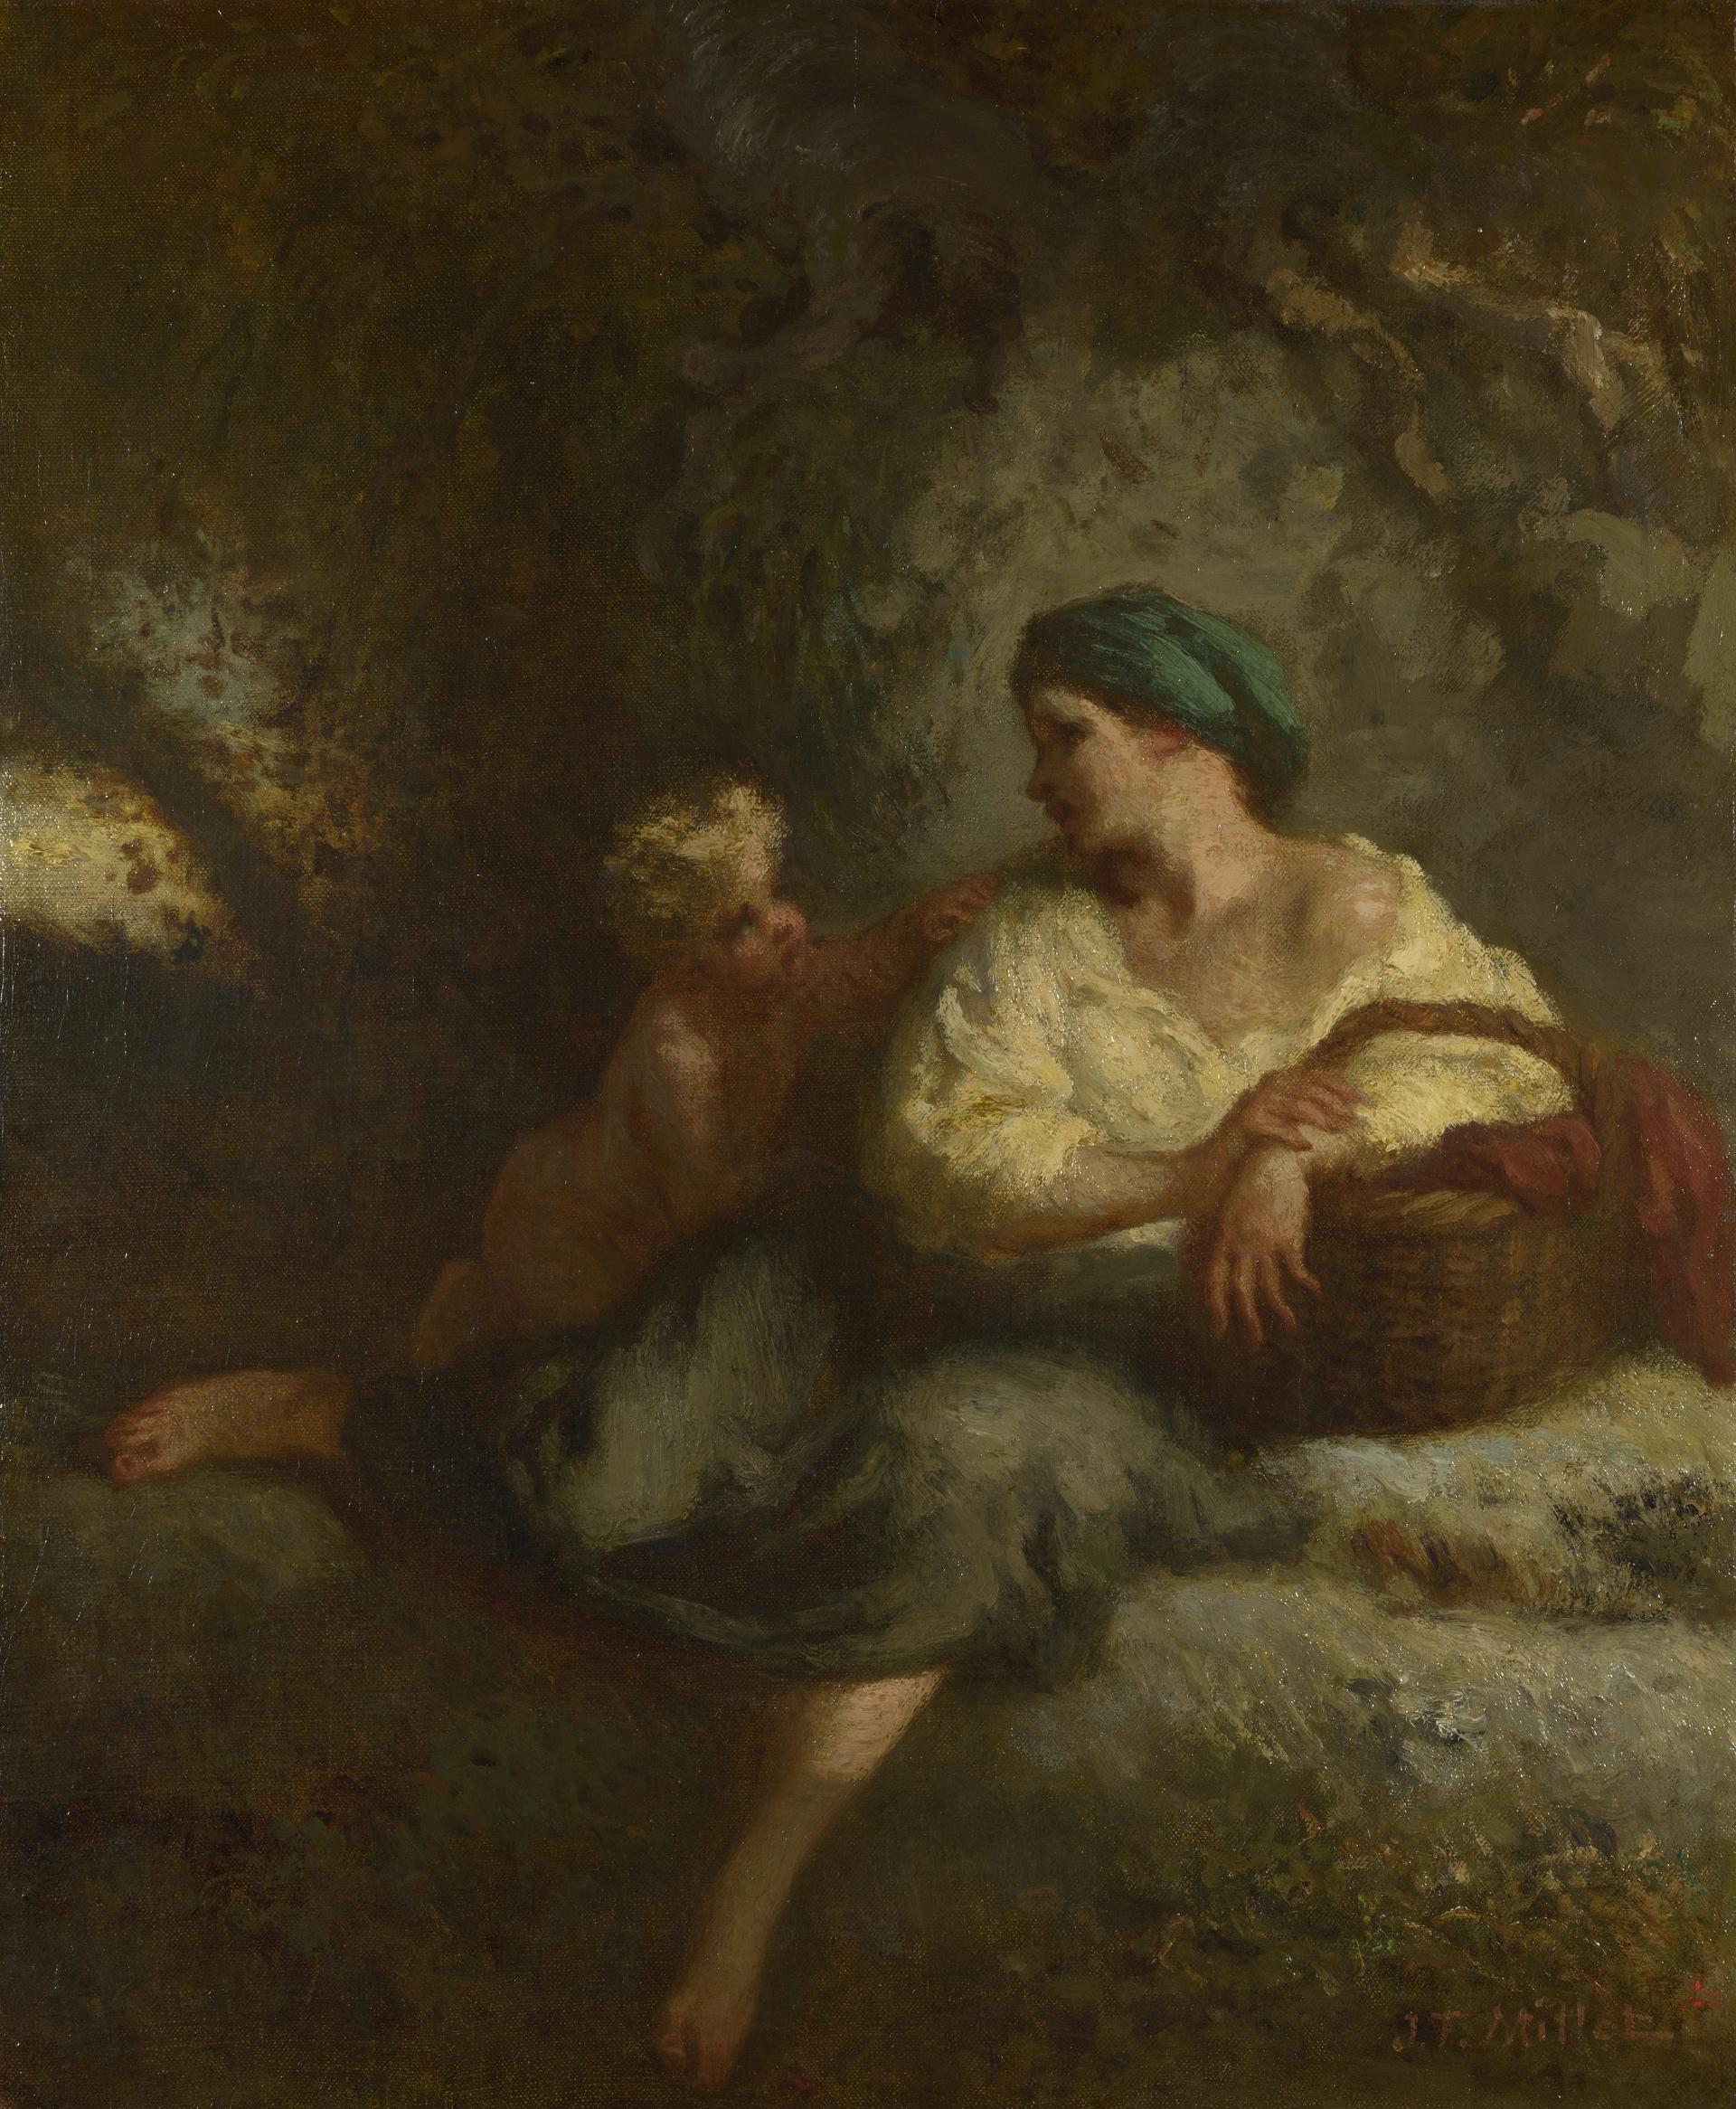 Jean-François Millet | Woman and Child in a Landscape | NG2636 